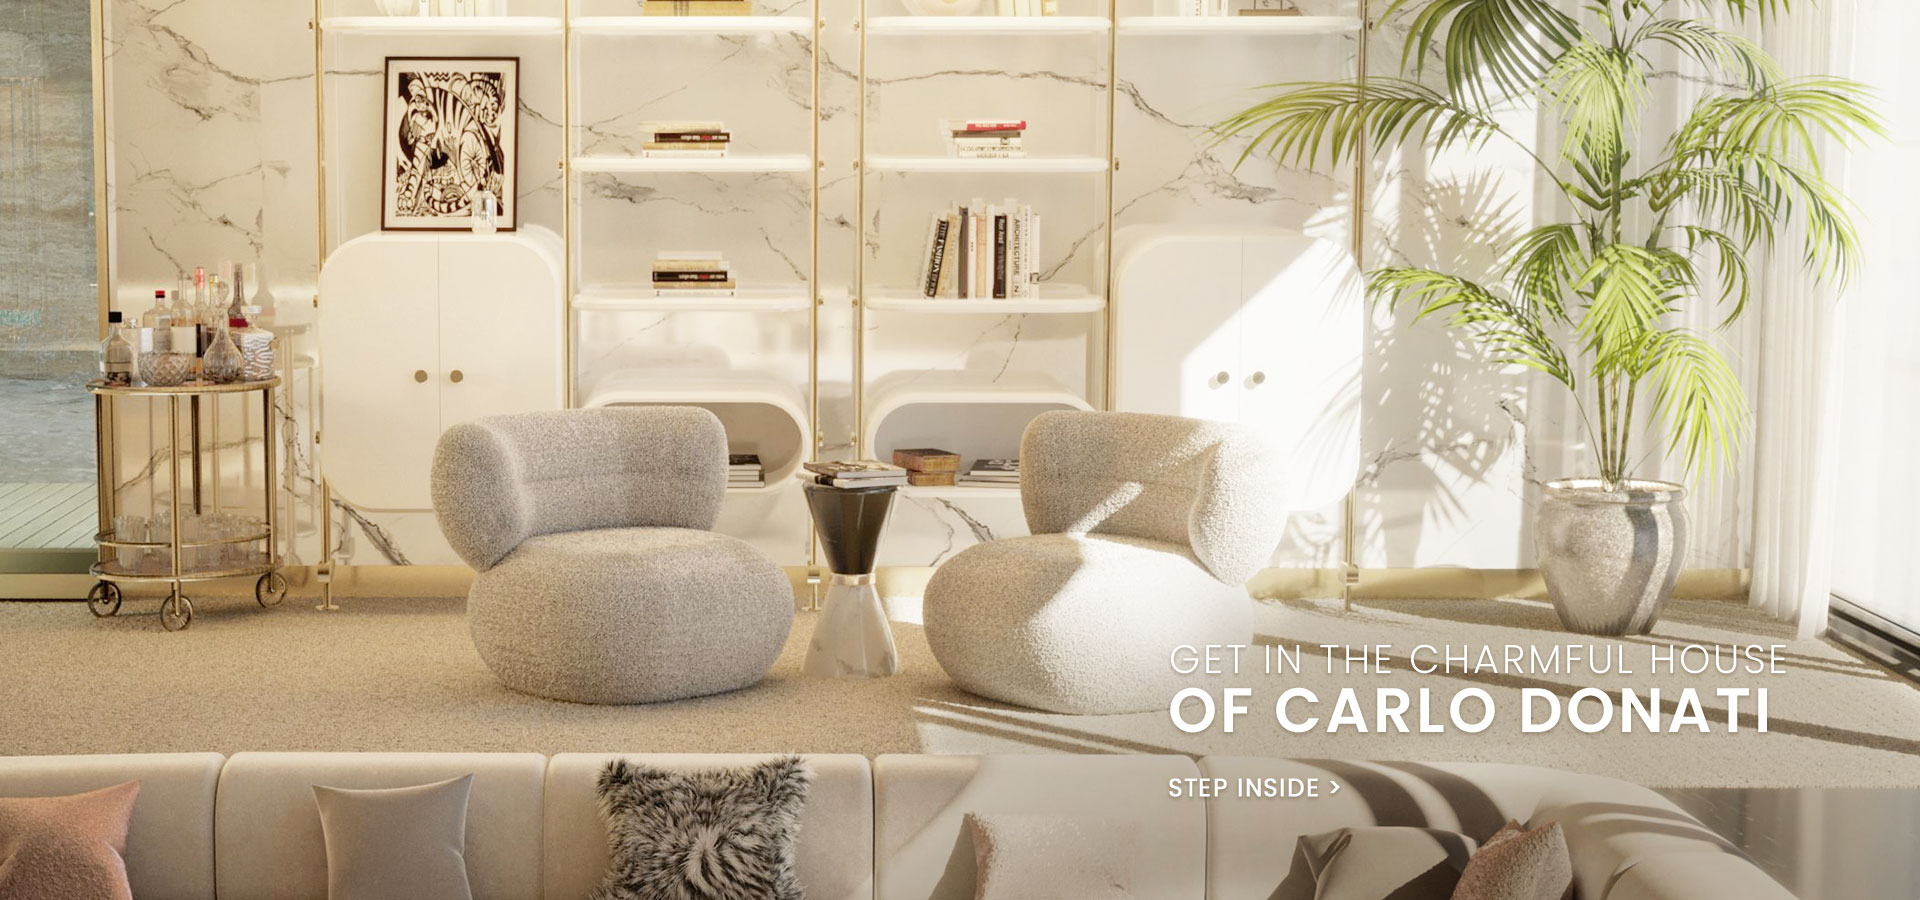 carlodonatihousevt carlo donati Get To Know Carlo Donati&#8217;s Most Famous Commercial Projects and Steal The Look! saint tropez carlo donati home